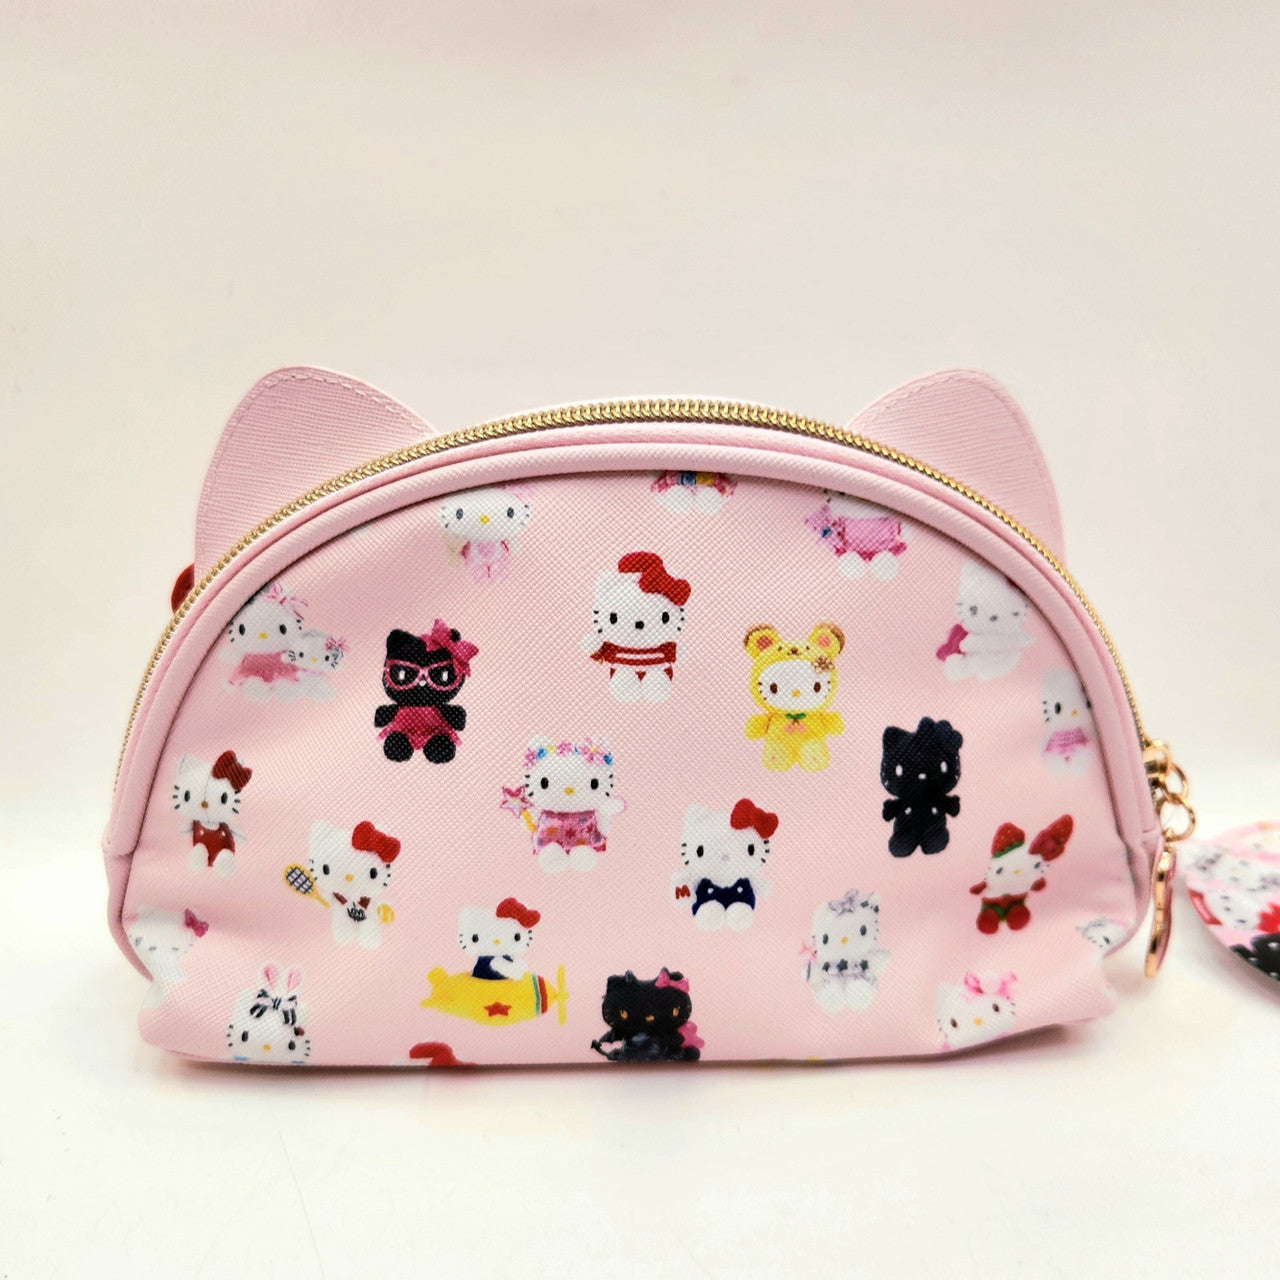 Hello Kitty 50th Anniversay OVER THE YEARS Pouch